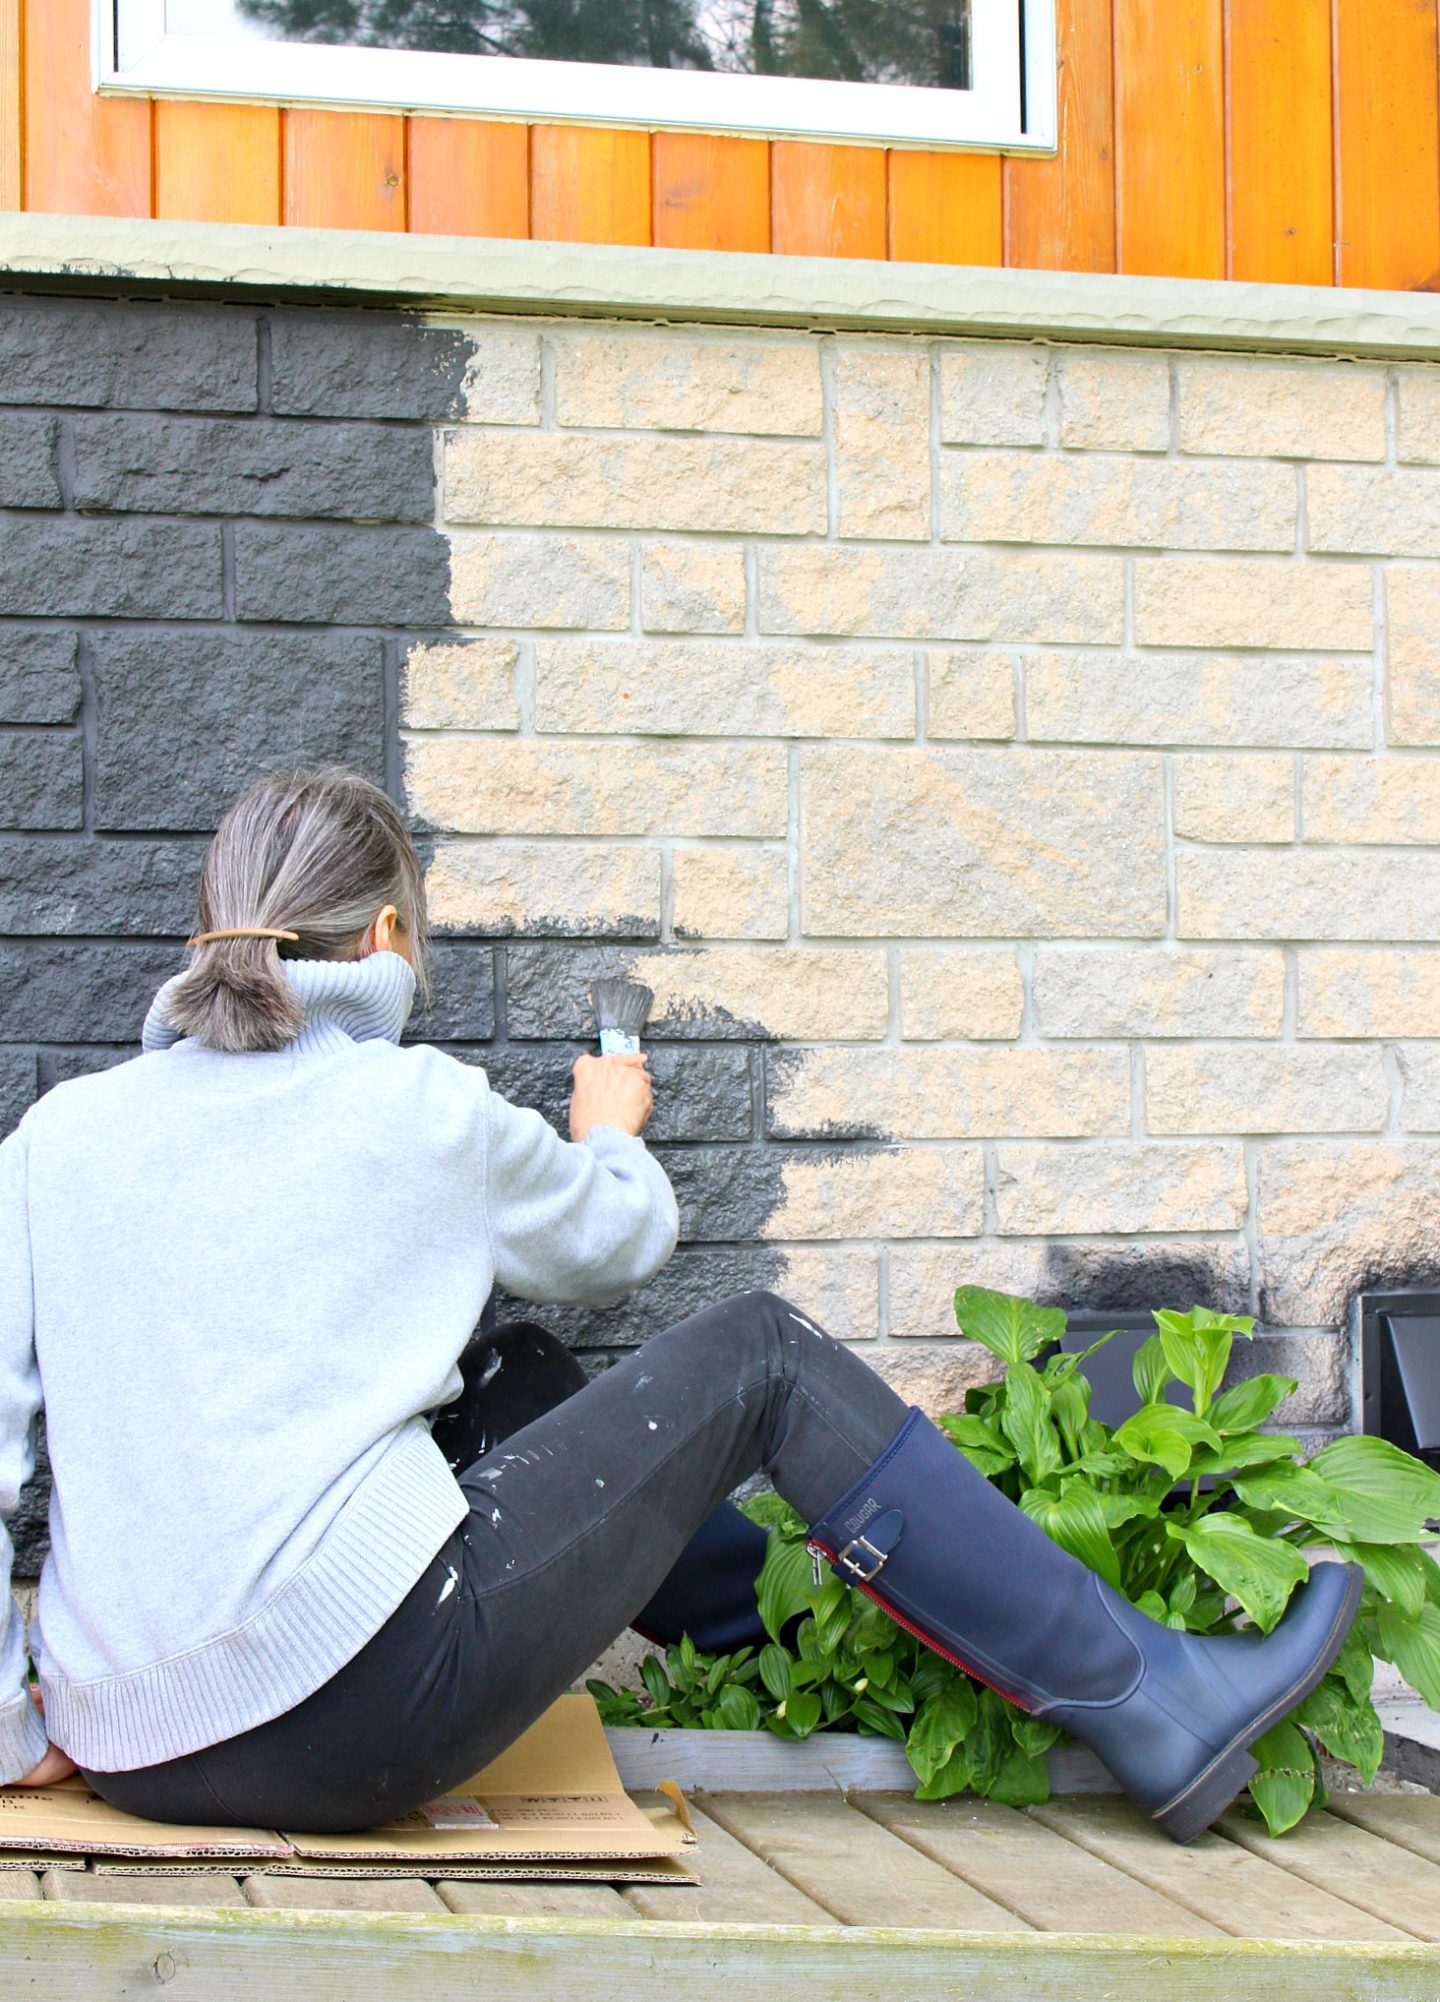 How to Paint Manufactured Stone Exterior